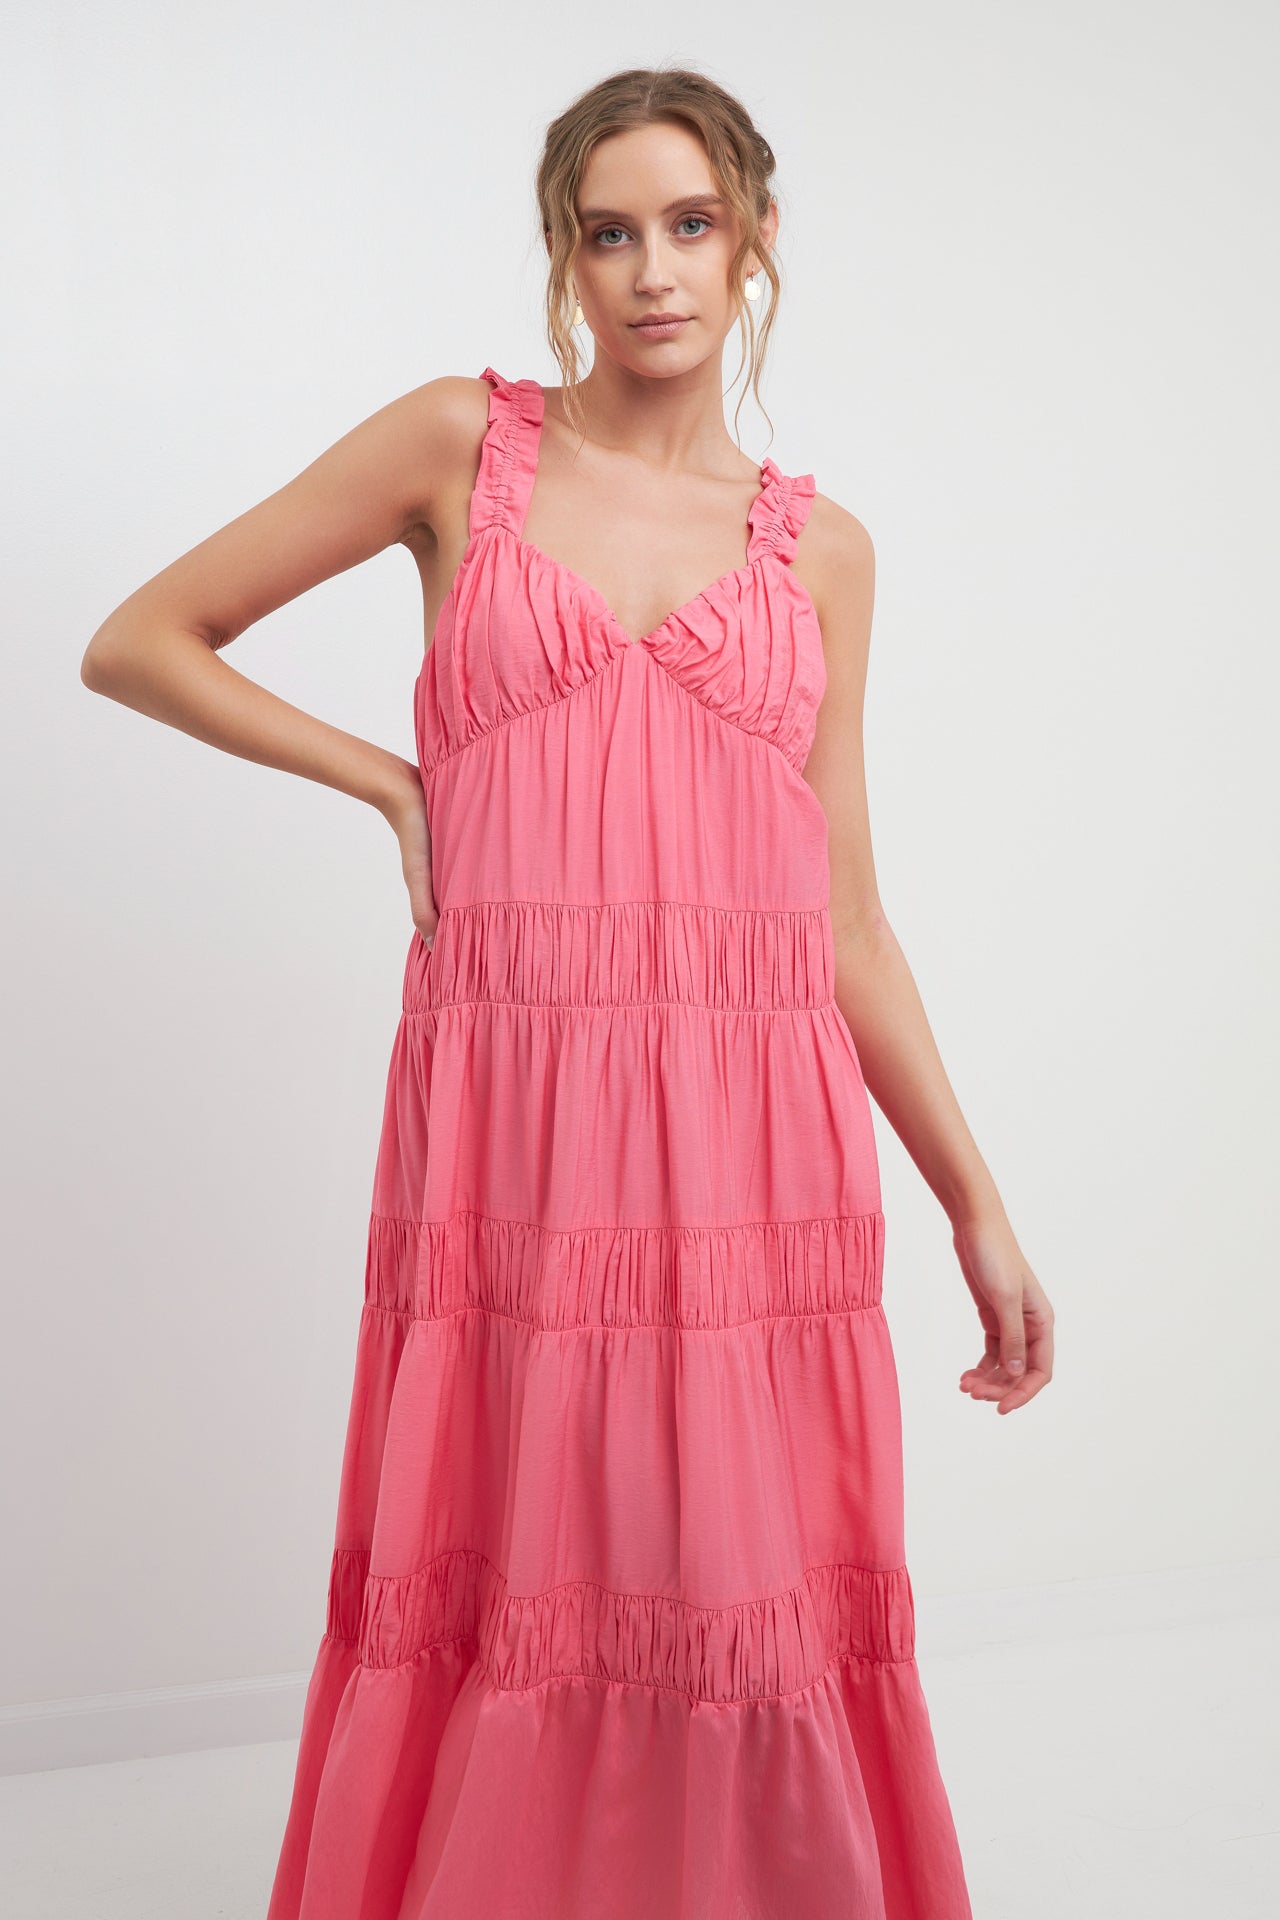 FREE THE ROSES - Ruched Layered Sweetheart Maxi Dress - DRESSES available at Objectrare